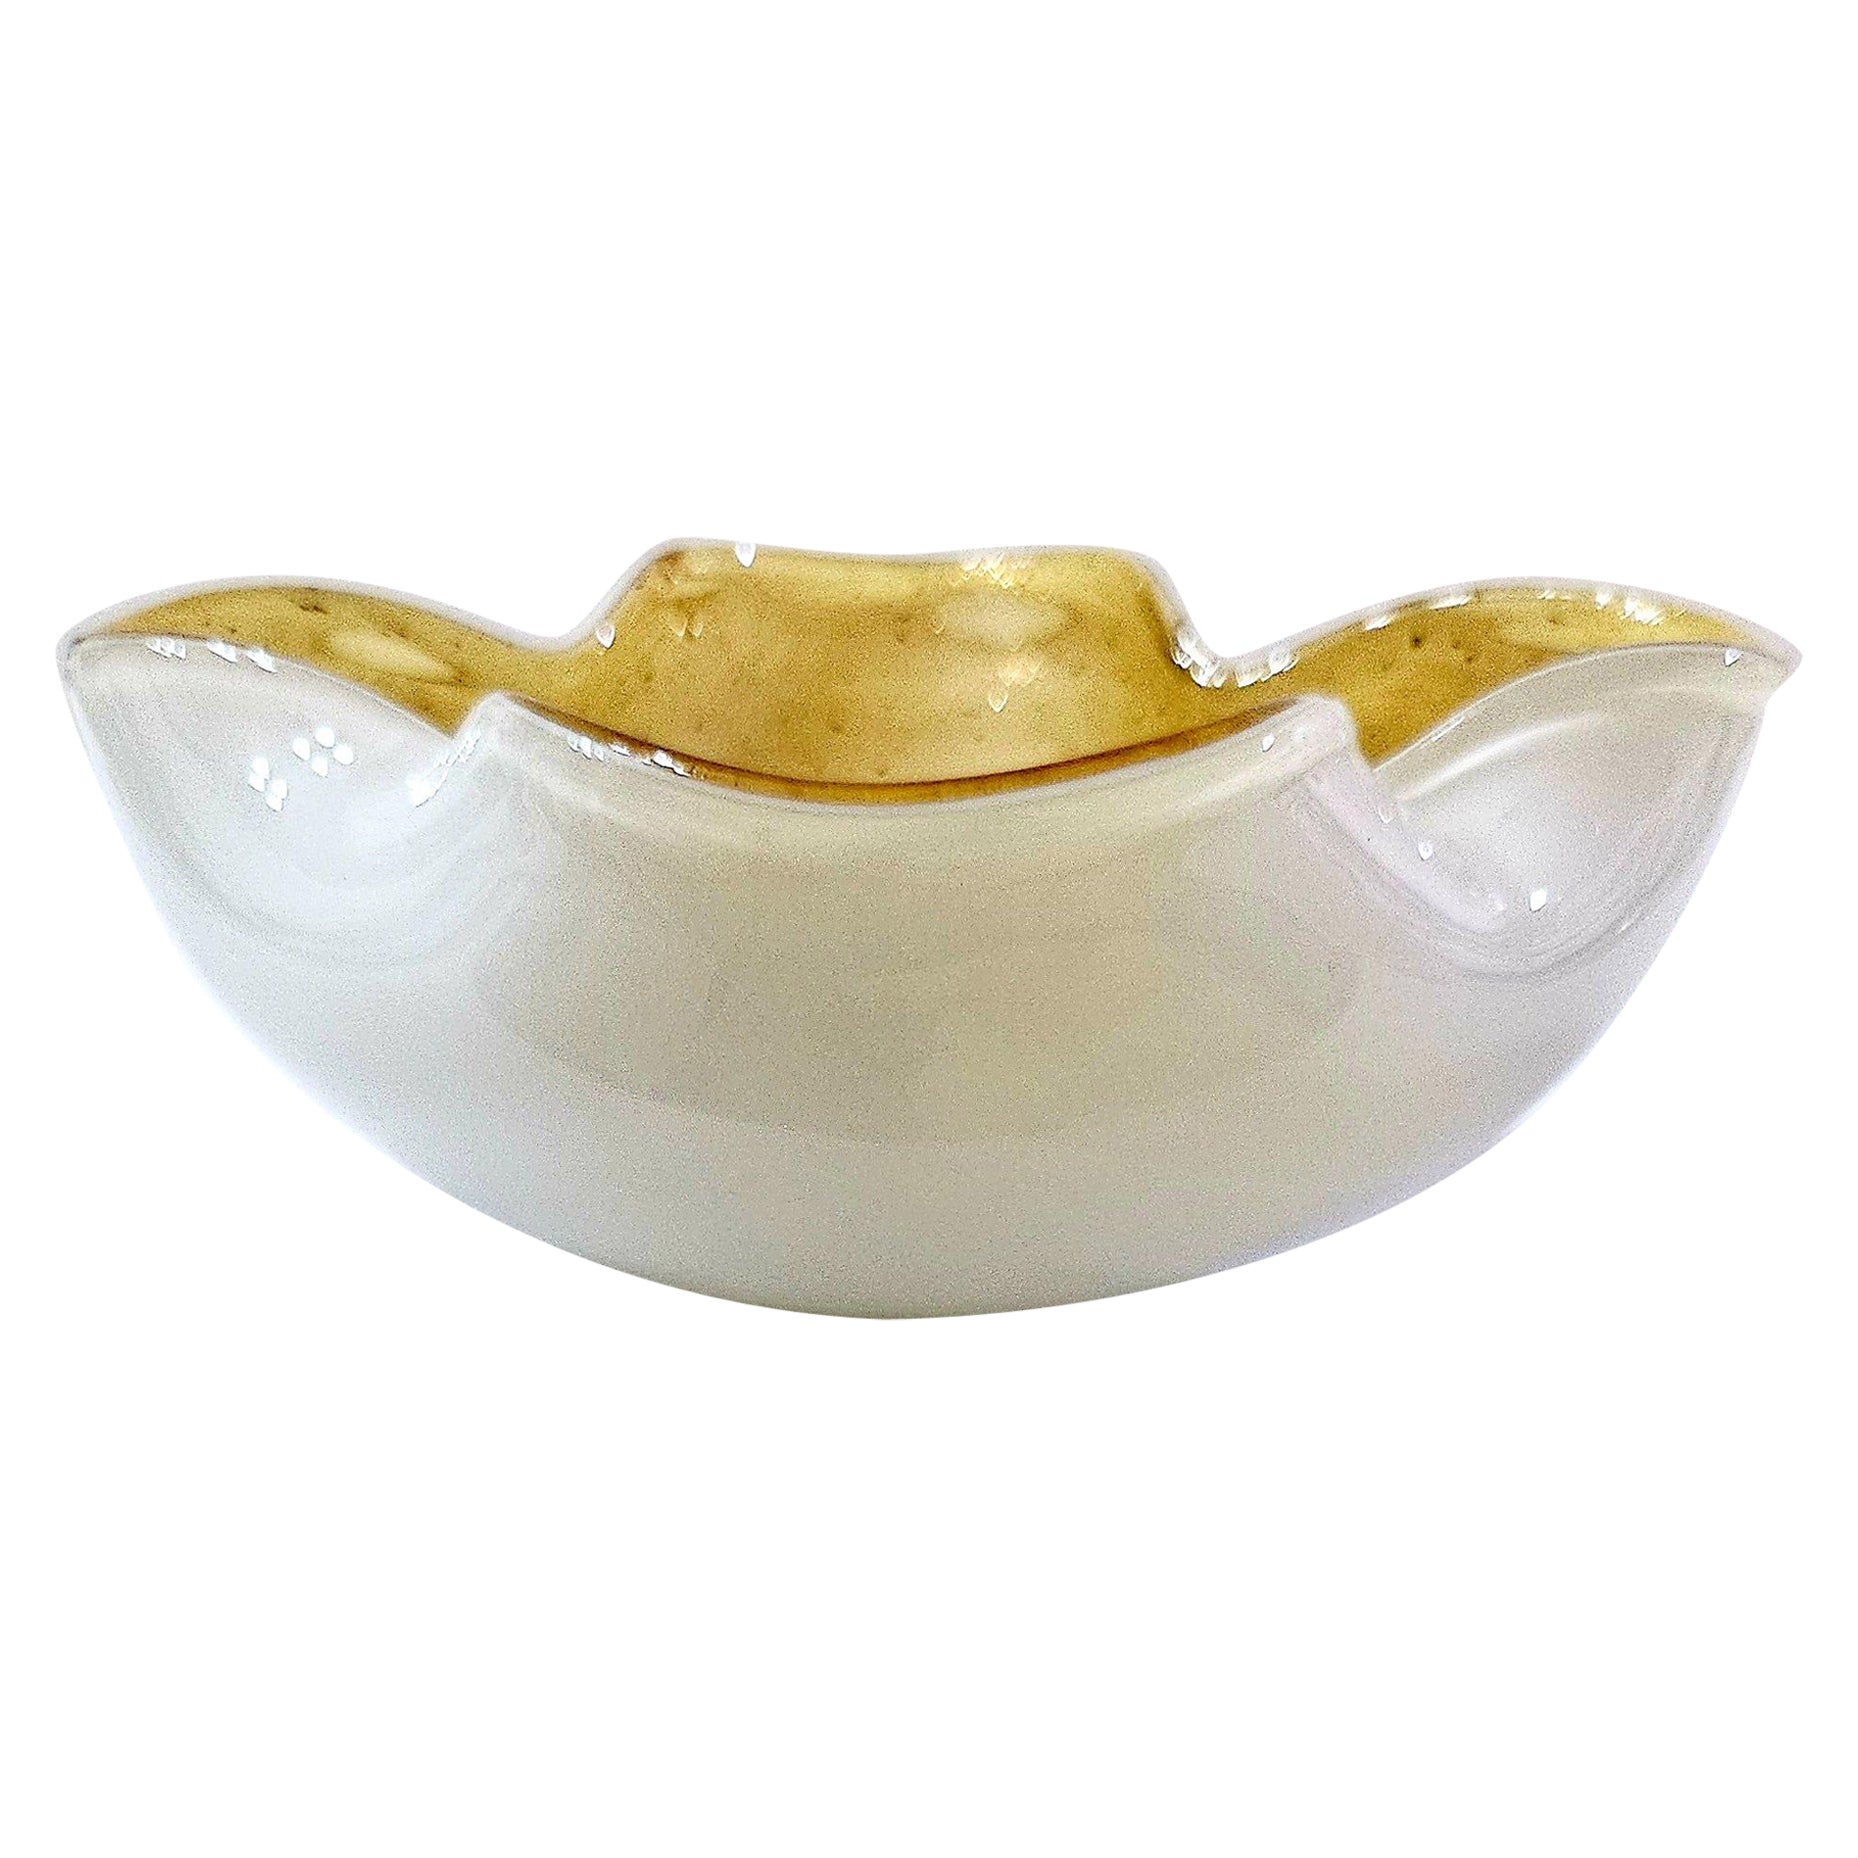 Vintage Murano Glass Bowl / Dish / Ashtray / Catch-All For Sale